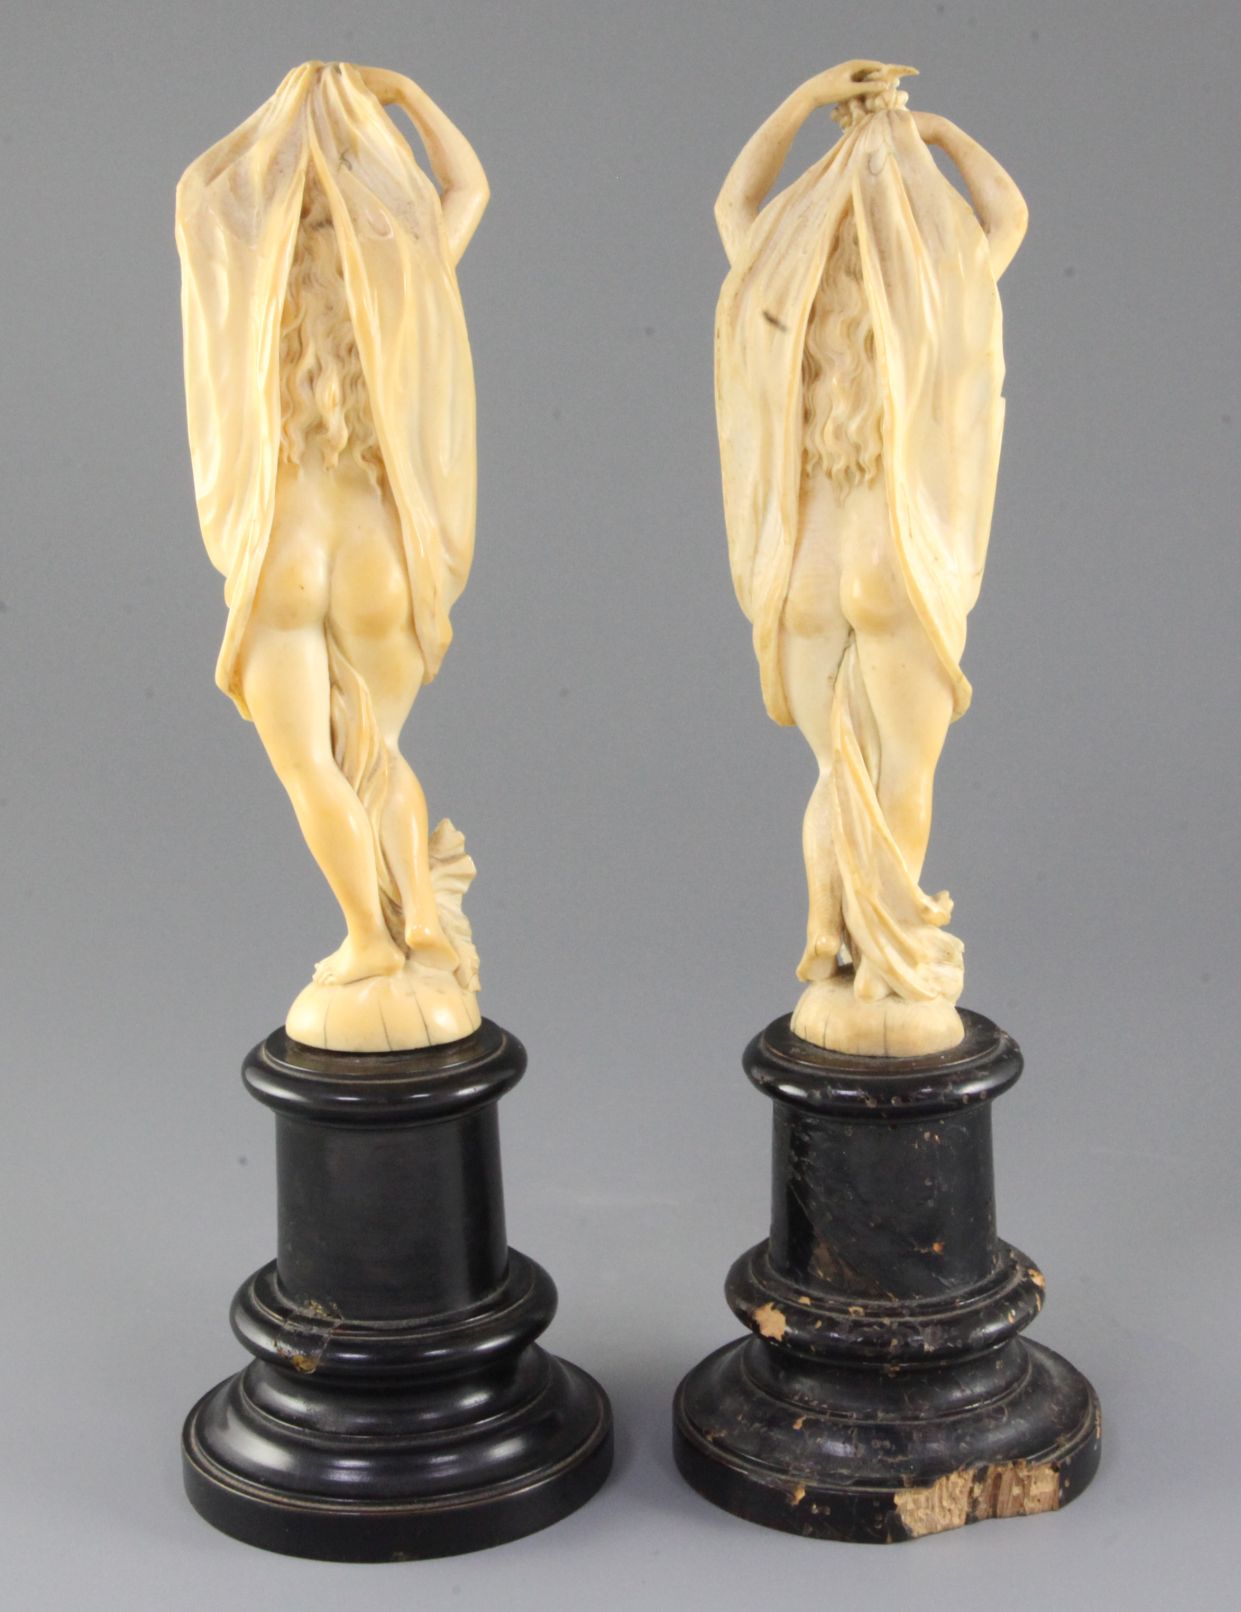 A pair of 19th century Dieppe ivory carvings of muses, standing semi-clad with arms aloft, on - Image 2 of 2